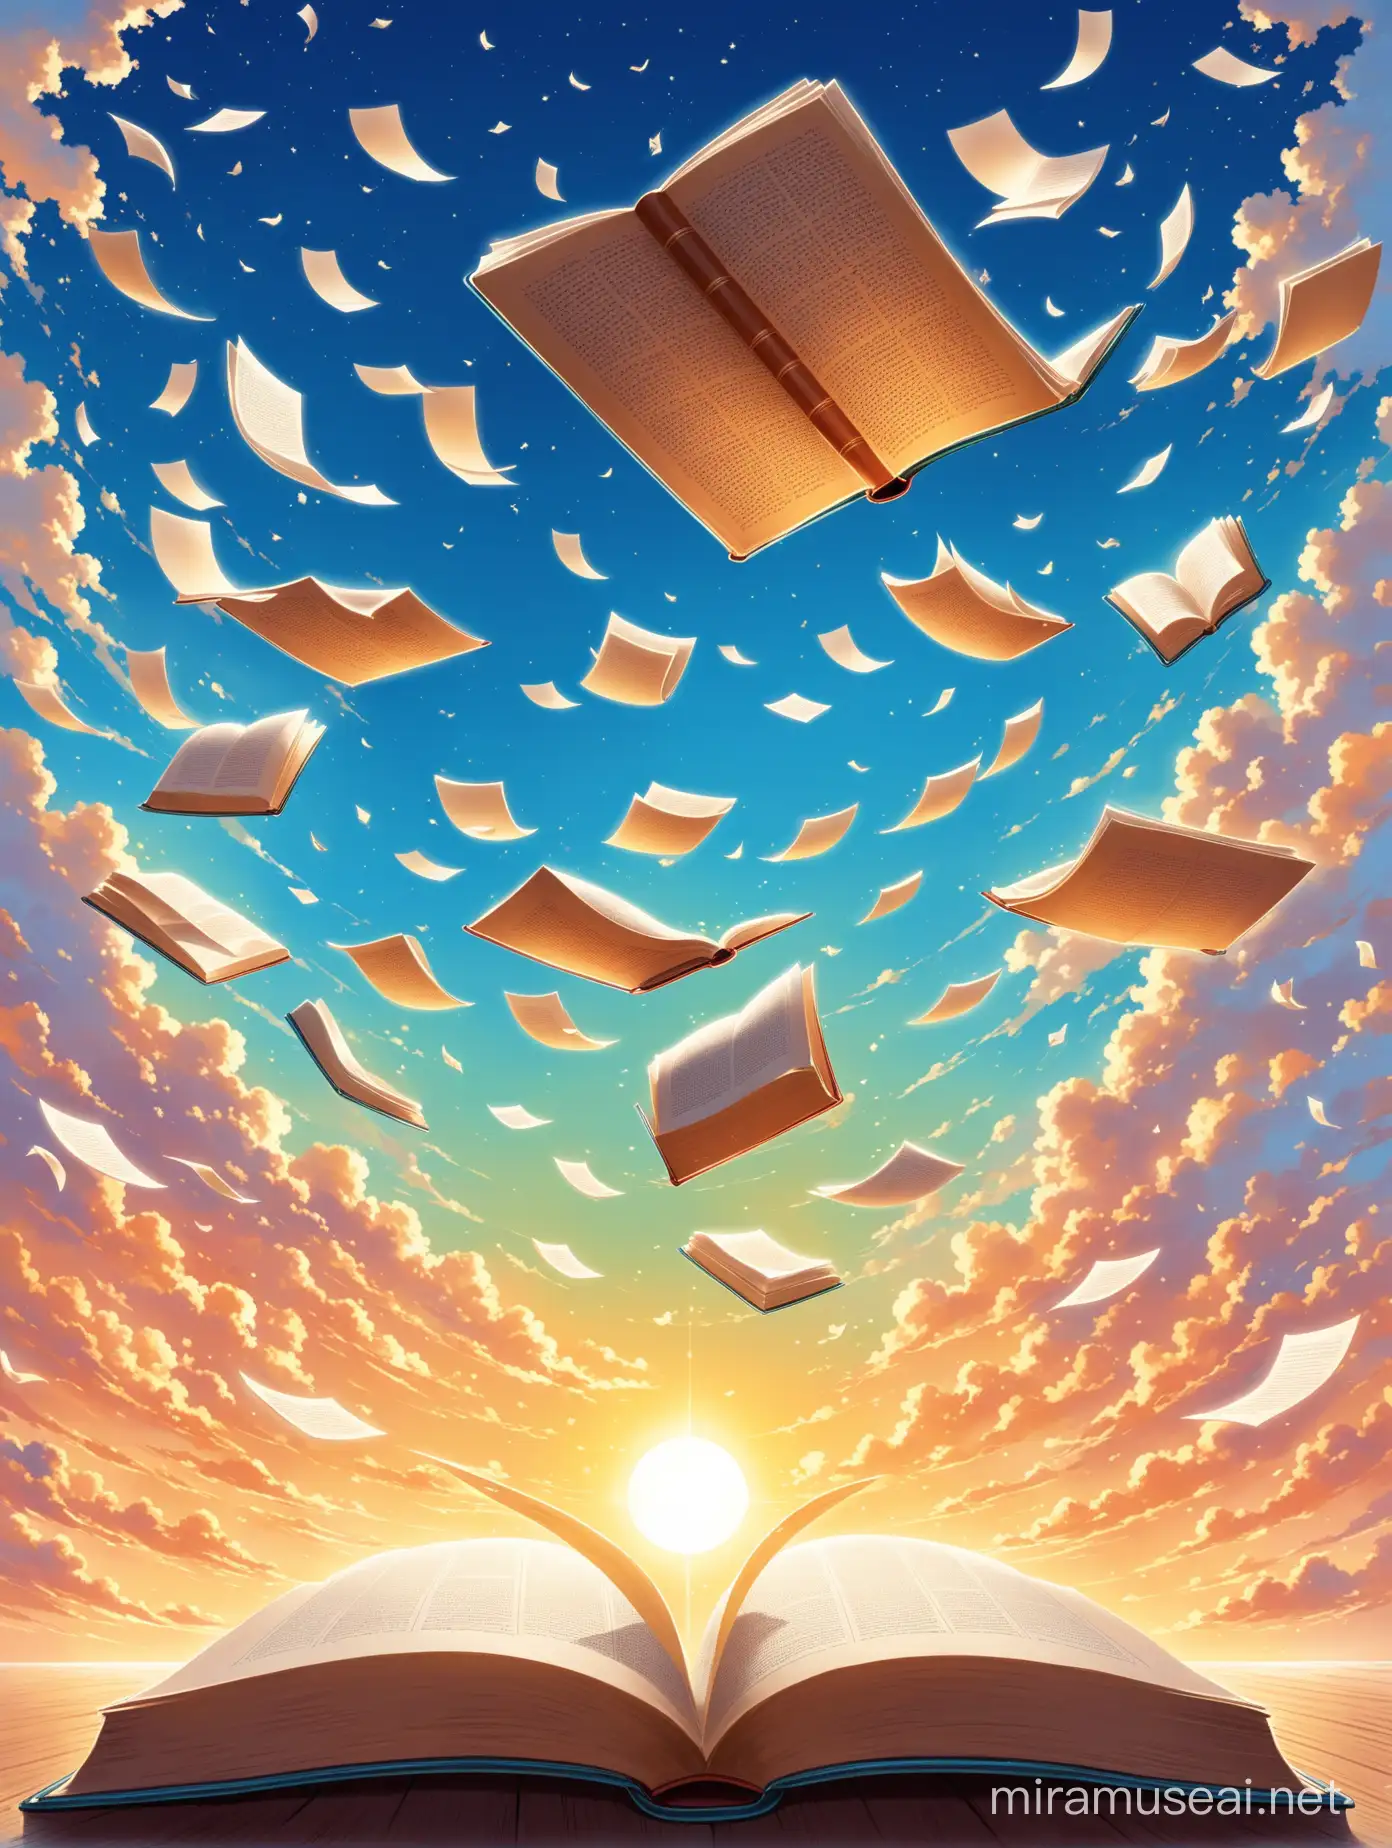 one book suspended in mid-air, pages fluttering as if caught in a gentle breeze around the book, there are scenes depicting different parts of the world